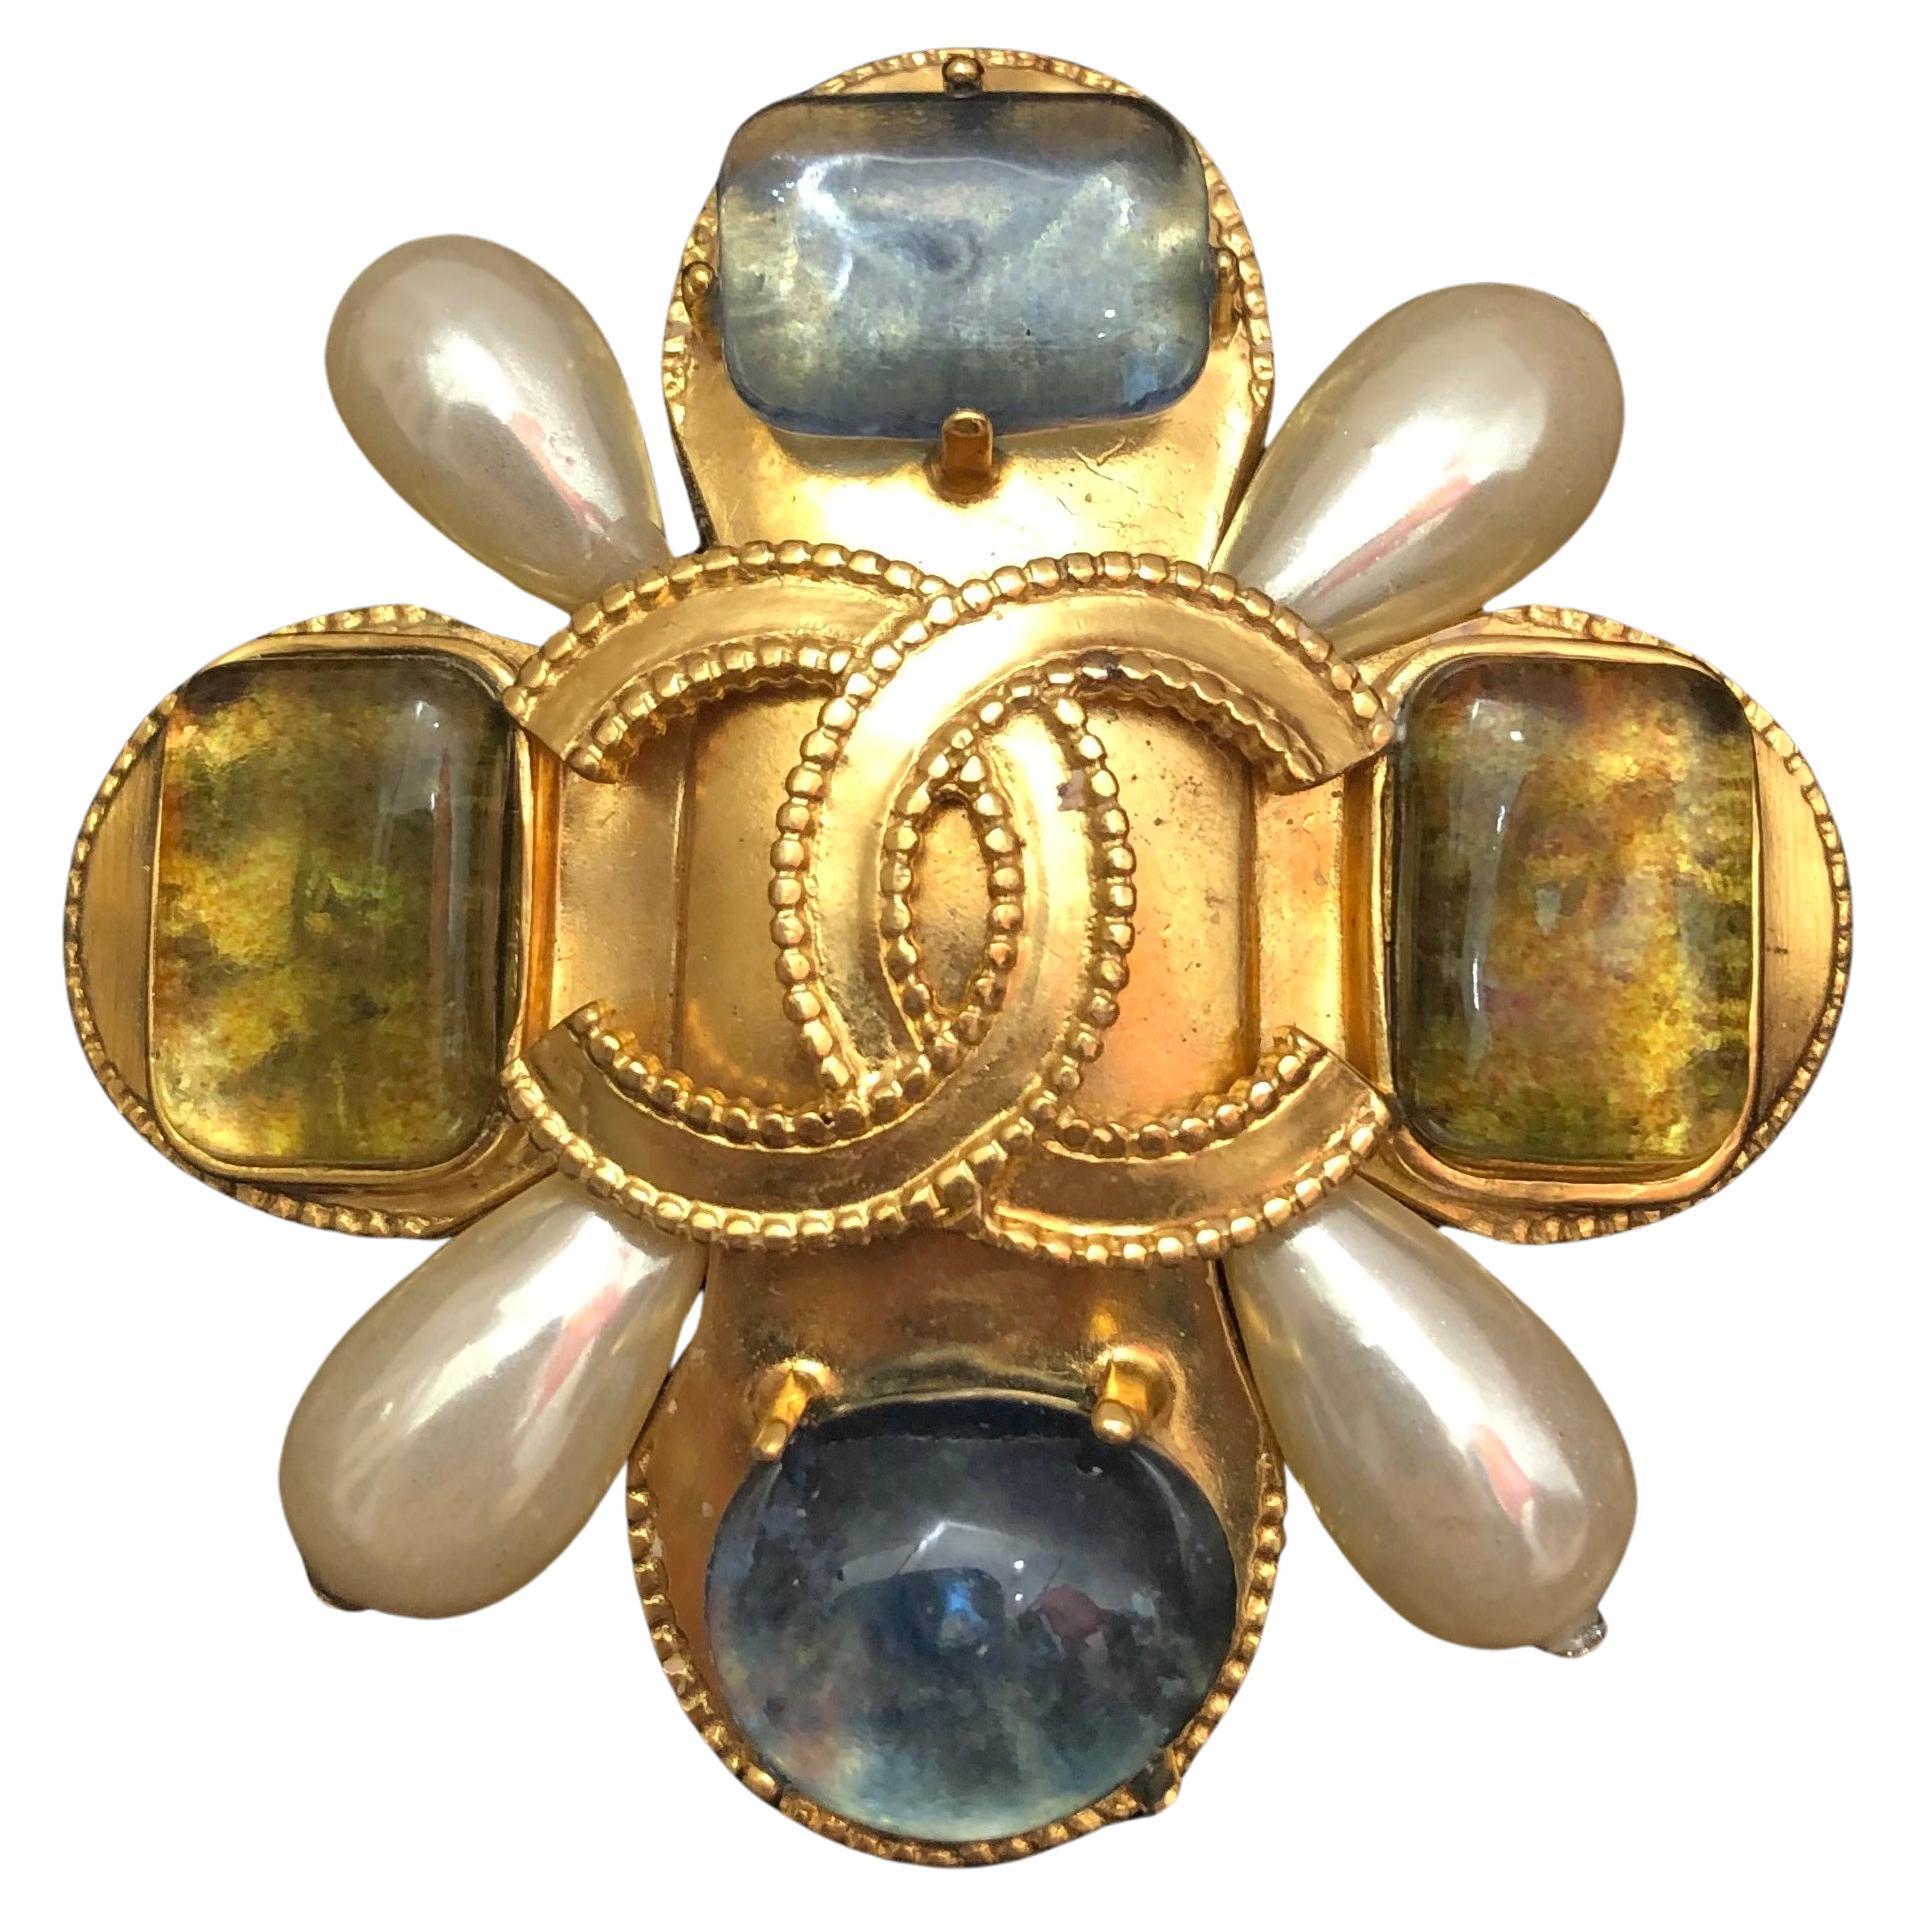 This vintage Chanel Byzantine clover brooch is crafted of gold toned metal featuring multi-colored Gripoix and tear drop faux pearls. Stamped 97A made in France. Measures approximately 6.0 x 6.0 cm. Comes with box. 

Condition: Minor signs of wear